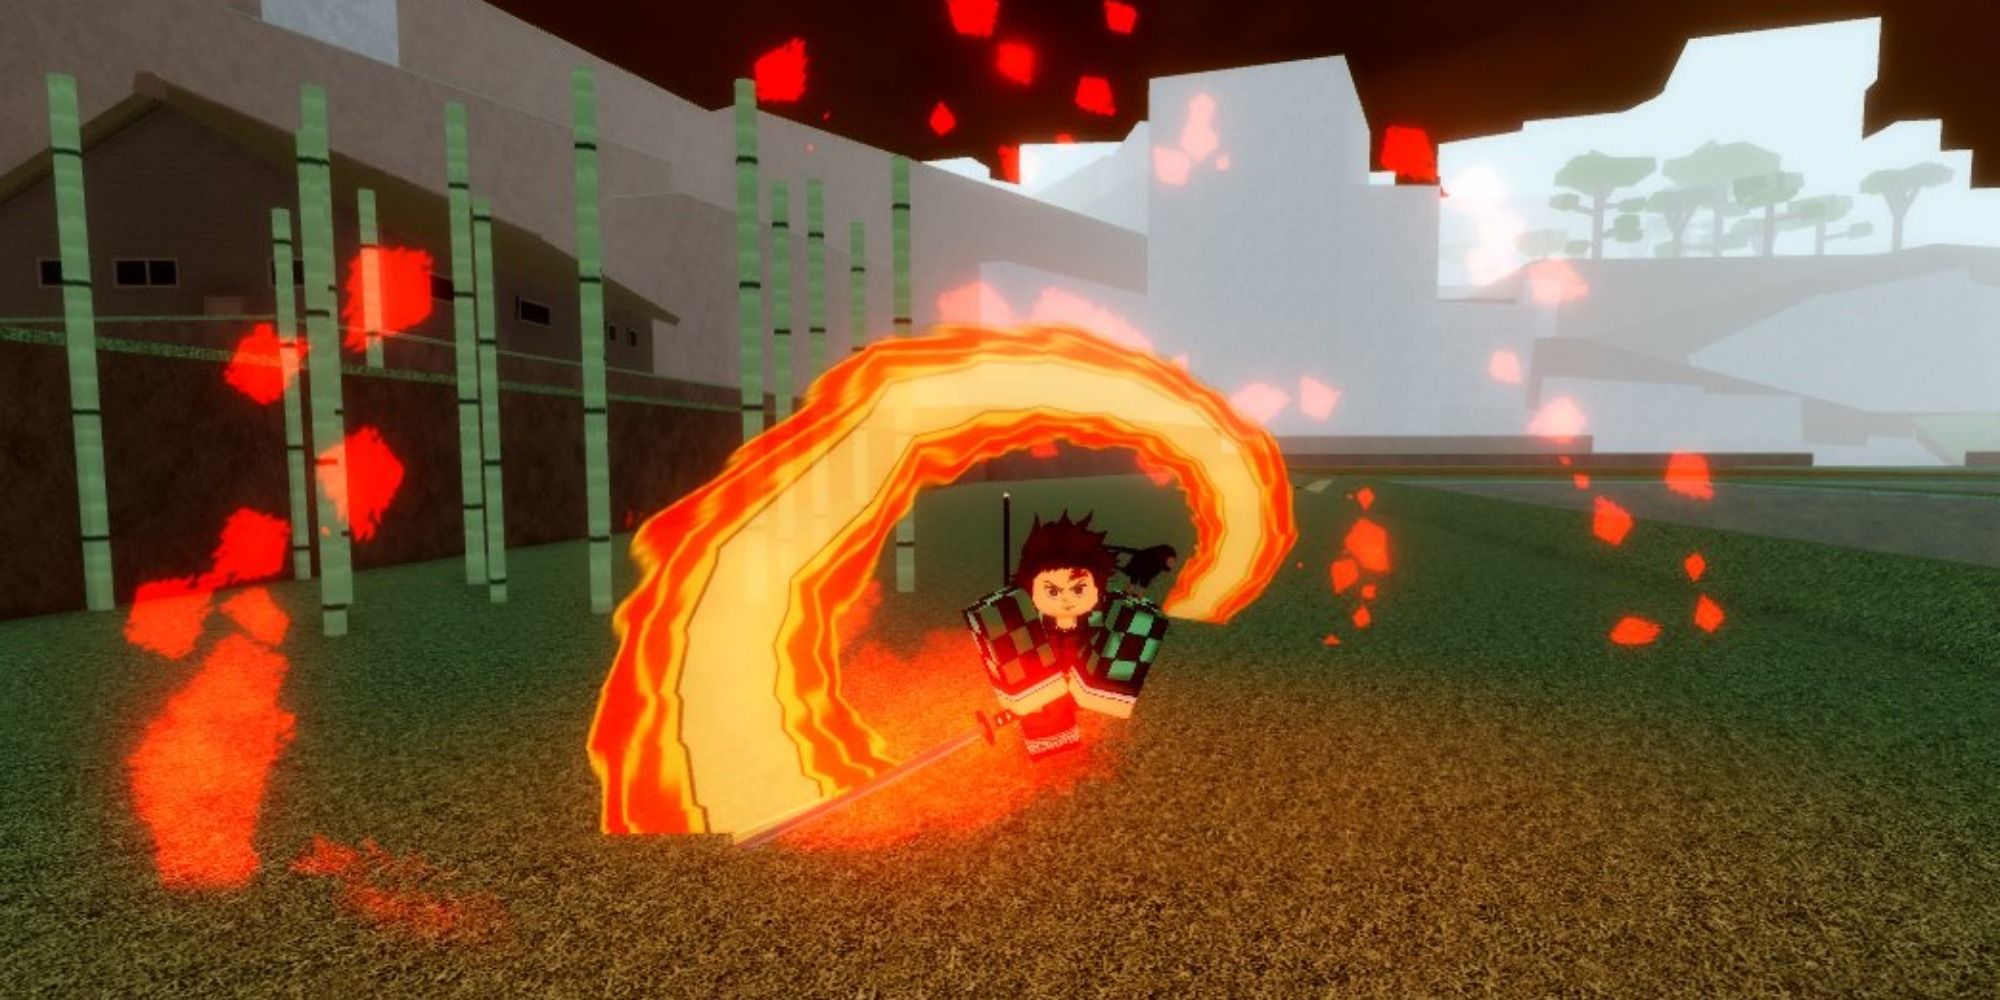 Roblox Demon Slayer RPG 2: Codes For Breathing And More | Game-Thought.com